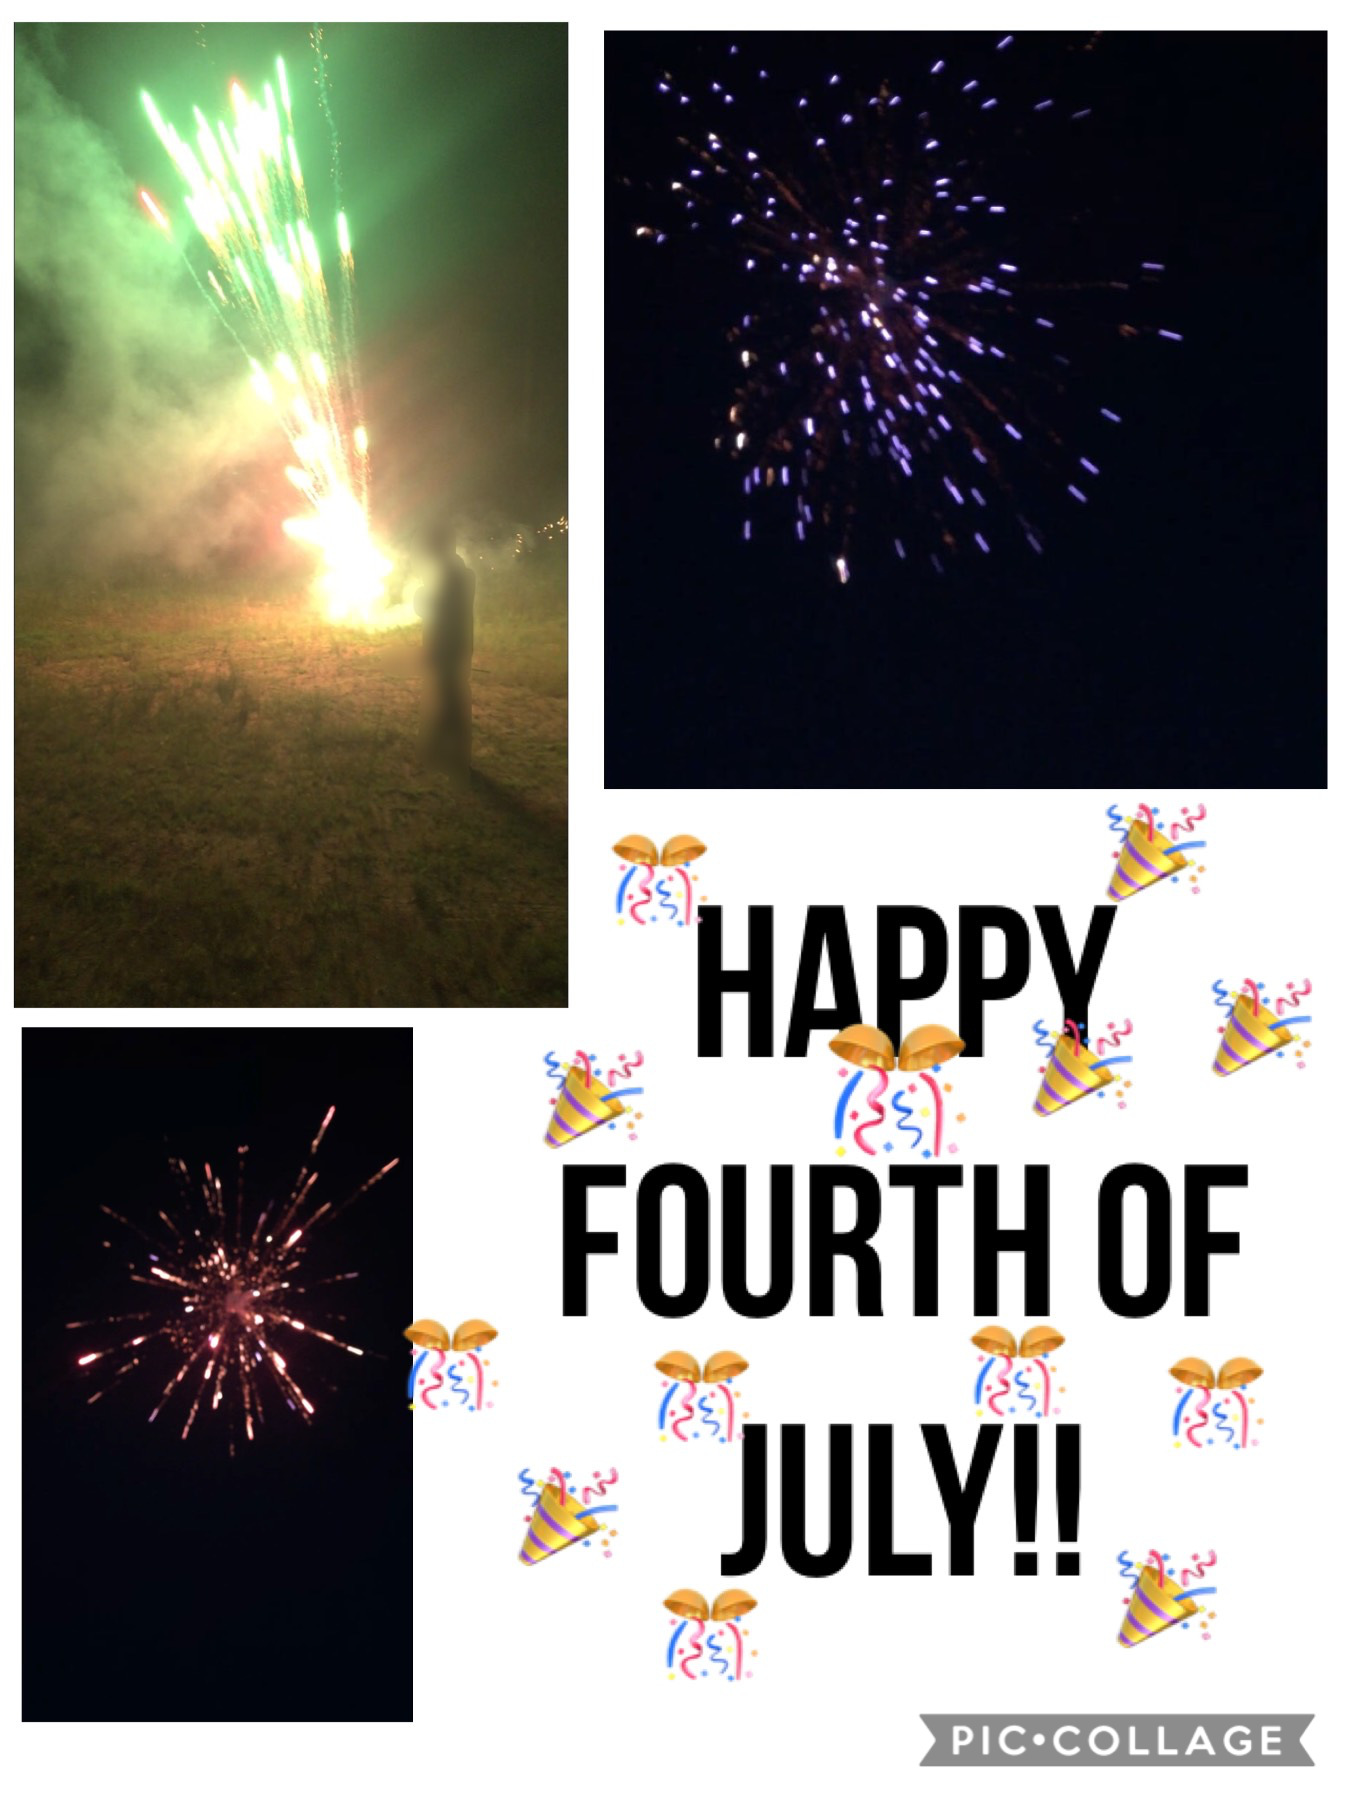 The phone died in the middle of the fire works so I missed recording the good ones... ANYWAYS! Happy Fourth of July everyone!! I hope you had a good time!